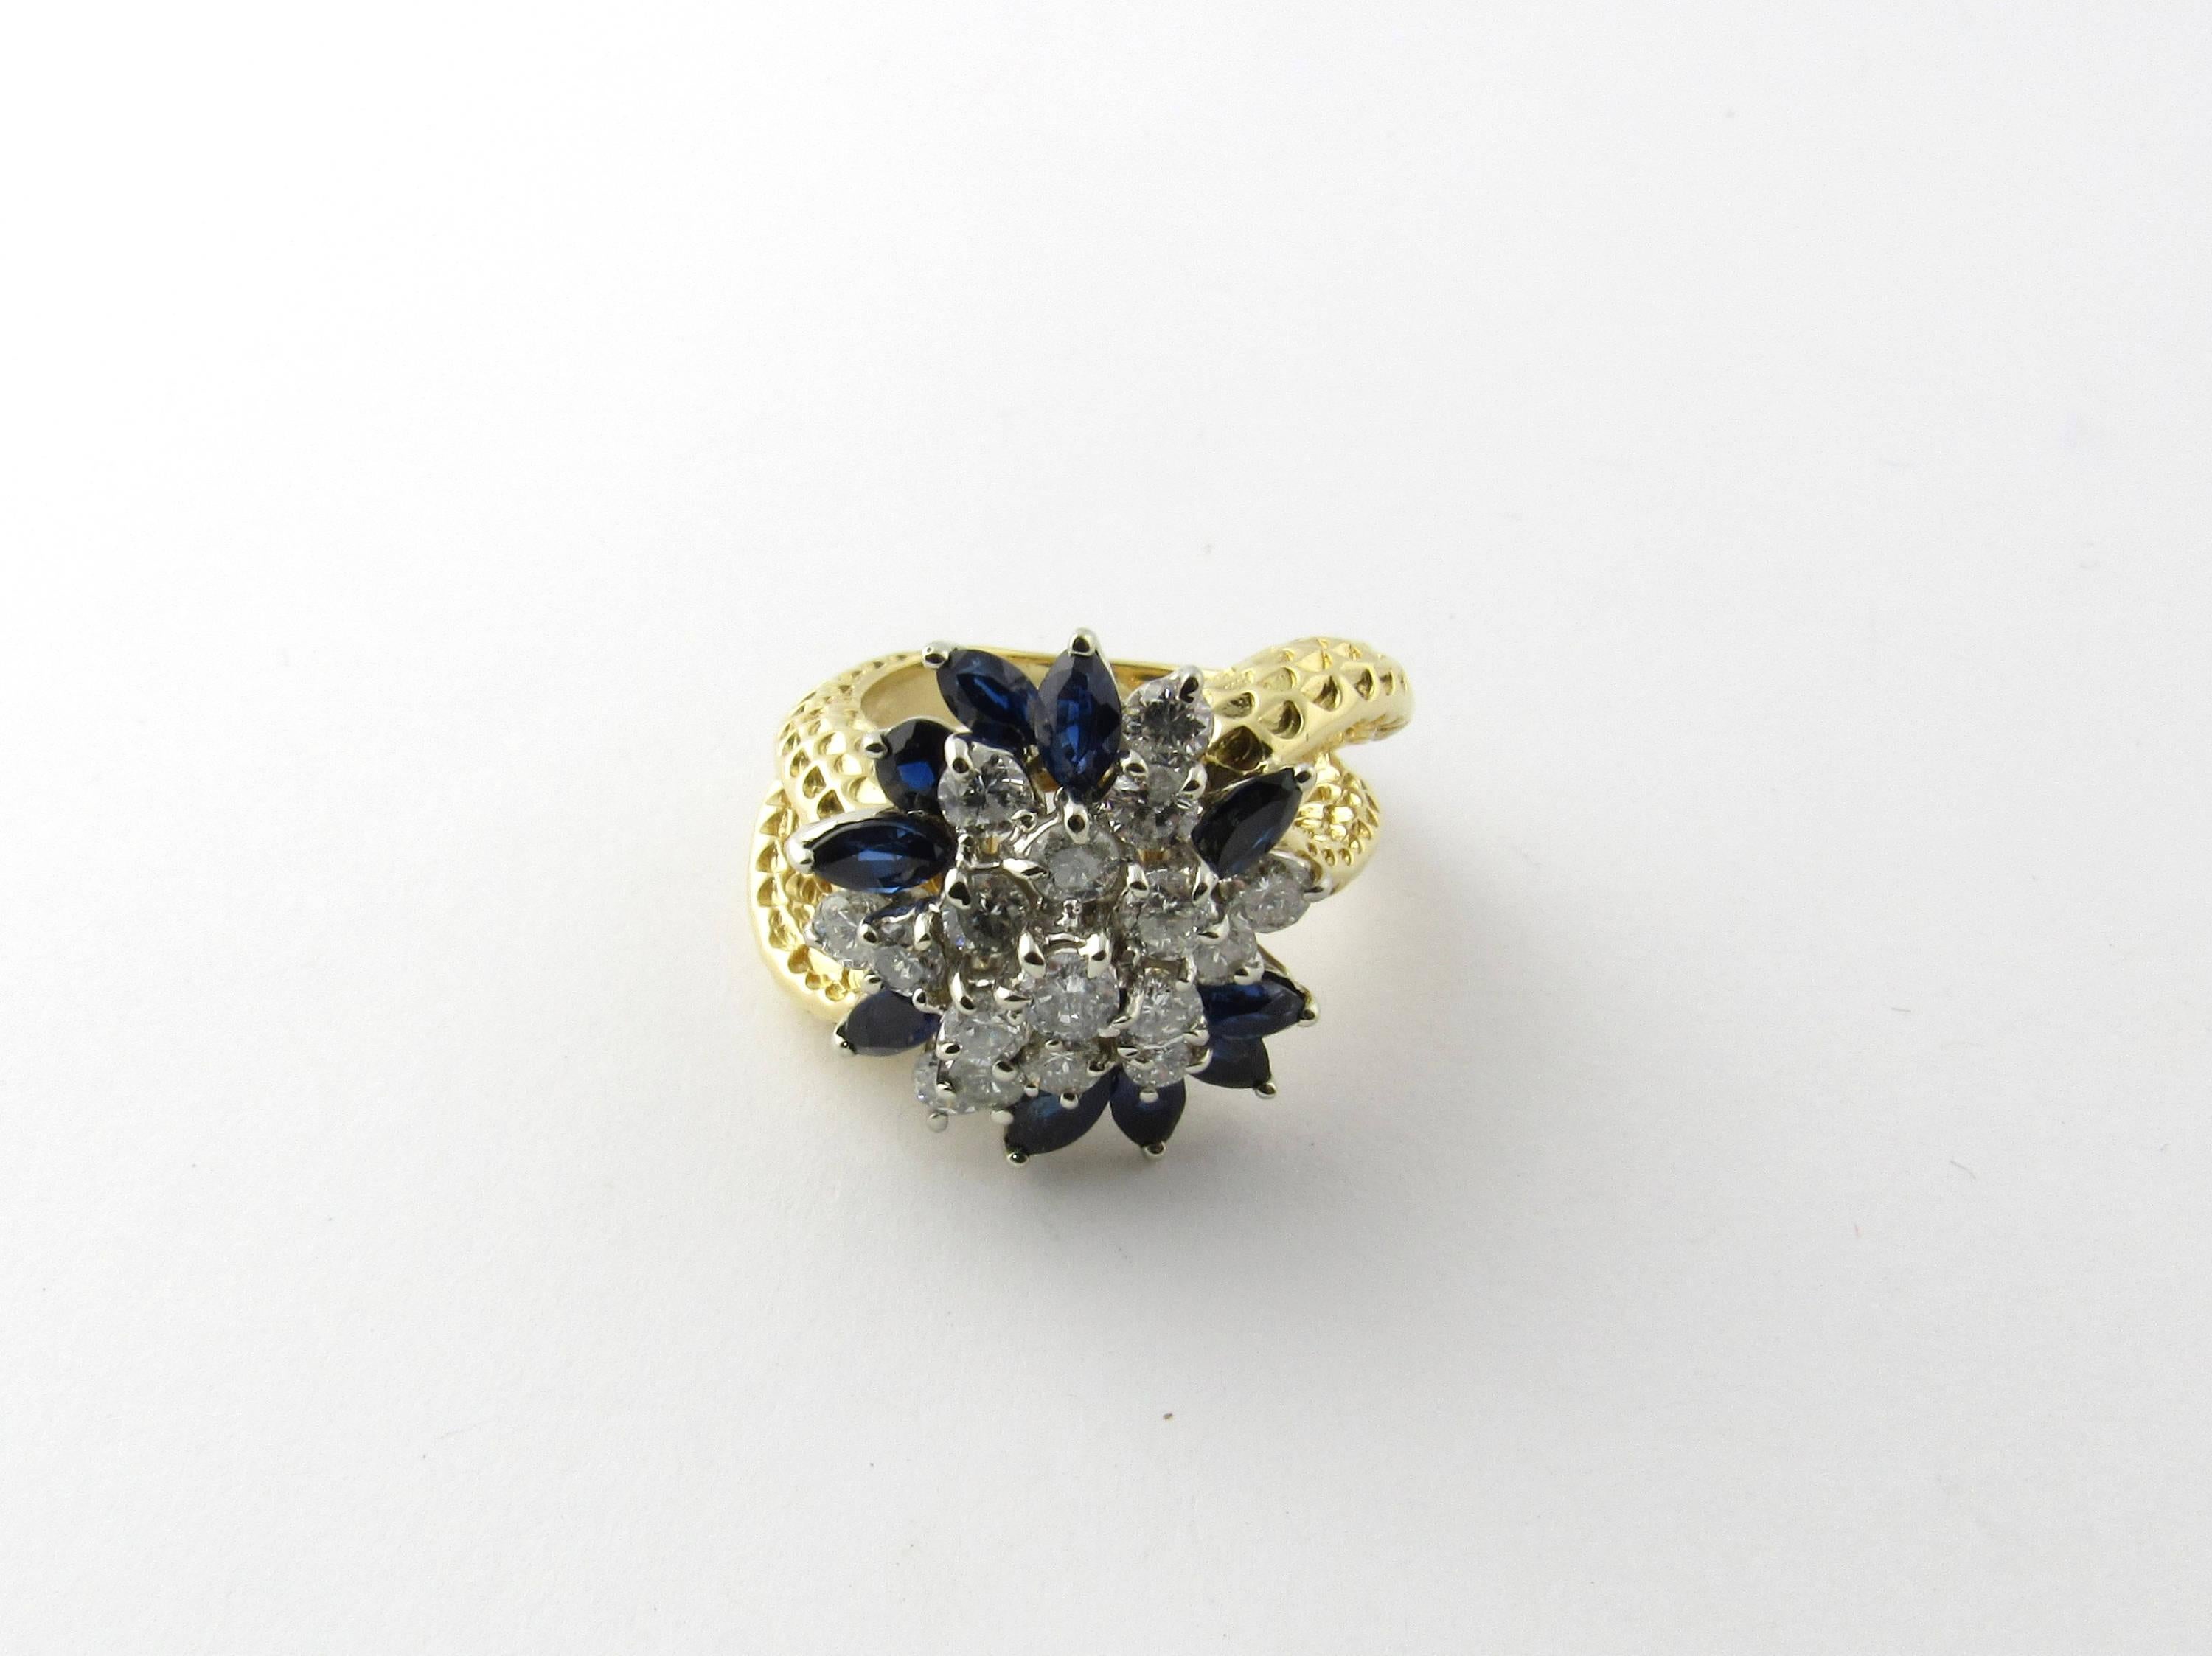 Vintage 18K Yellow Gold Sapphire and Diamond Floral Cocktail Ring Size 7

This ring is a bright sparkly statement piece with so much style!

The front of the ring is a floral design set with 10 genuine marquis sapphires and 15 round brilliant